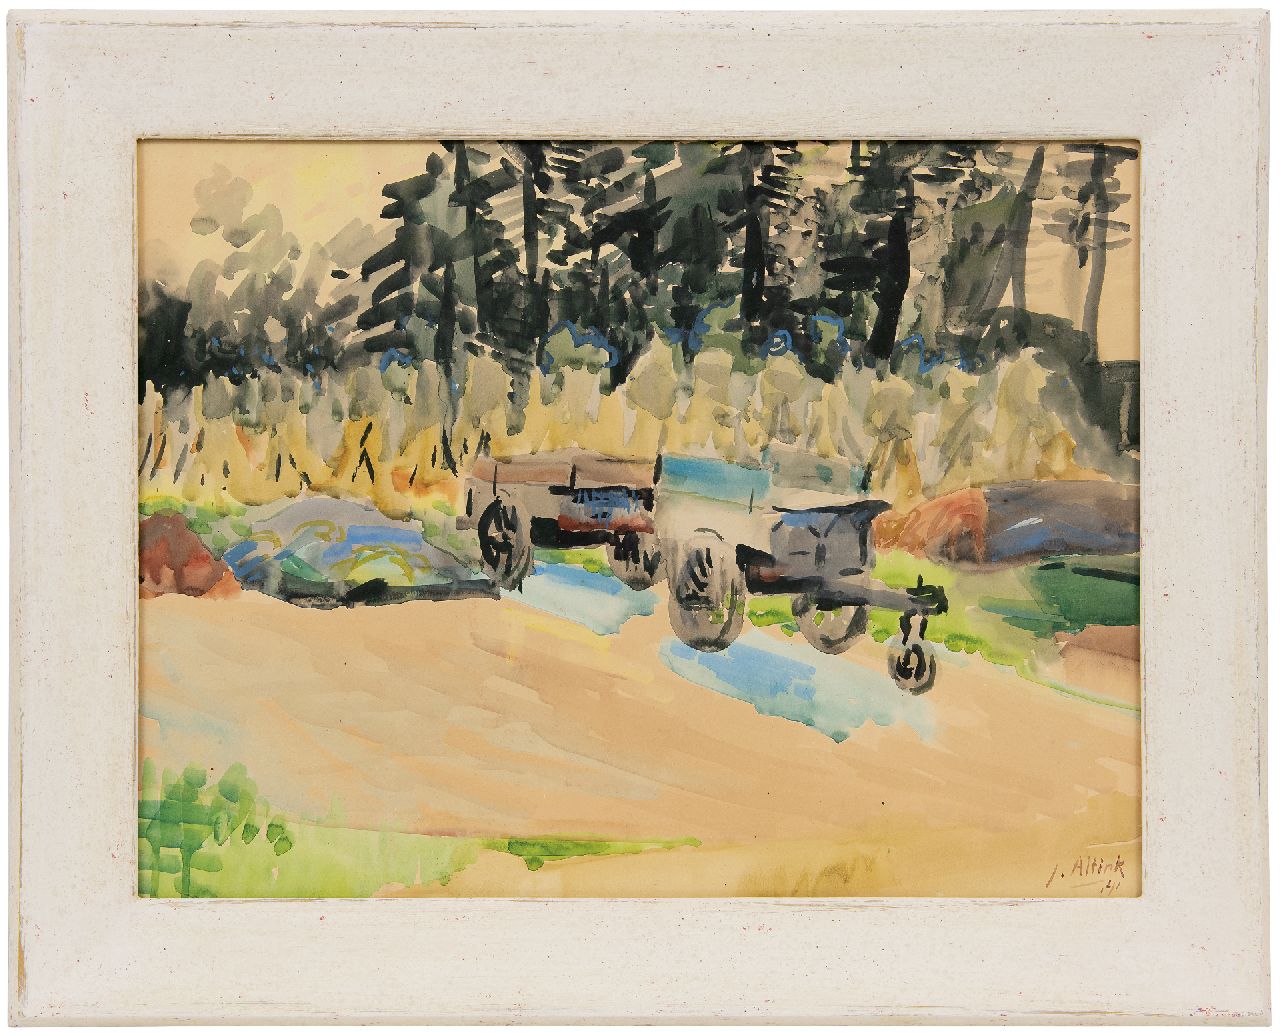 Altink J.  | Jan Altink | Watercolours and drawings offered for sale | Farmyard in Essen, watercolour on paper 44.7 x 59.5 cm, signed l.r. and dated '41